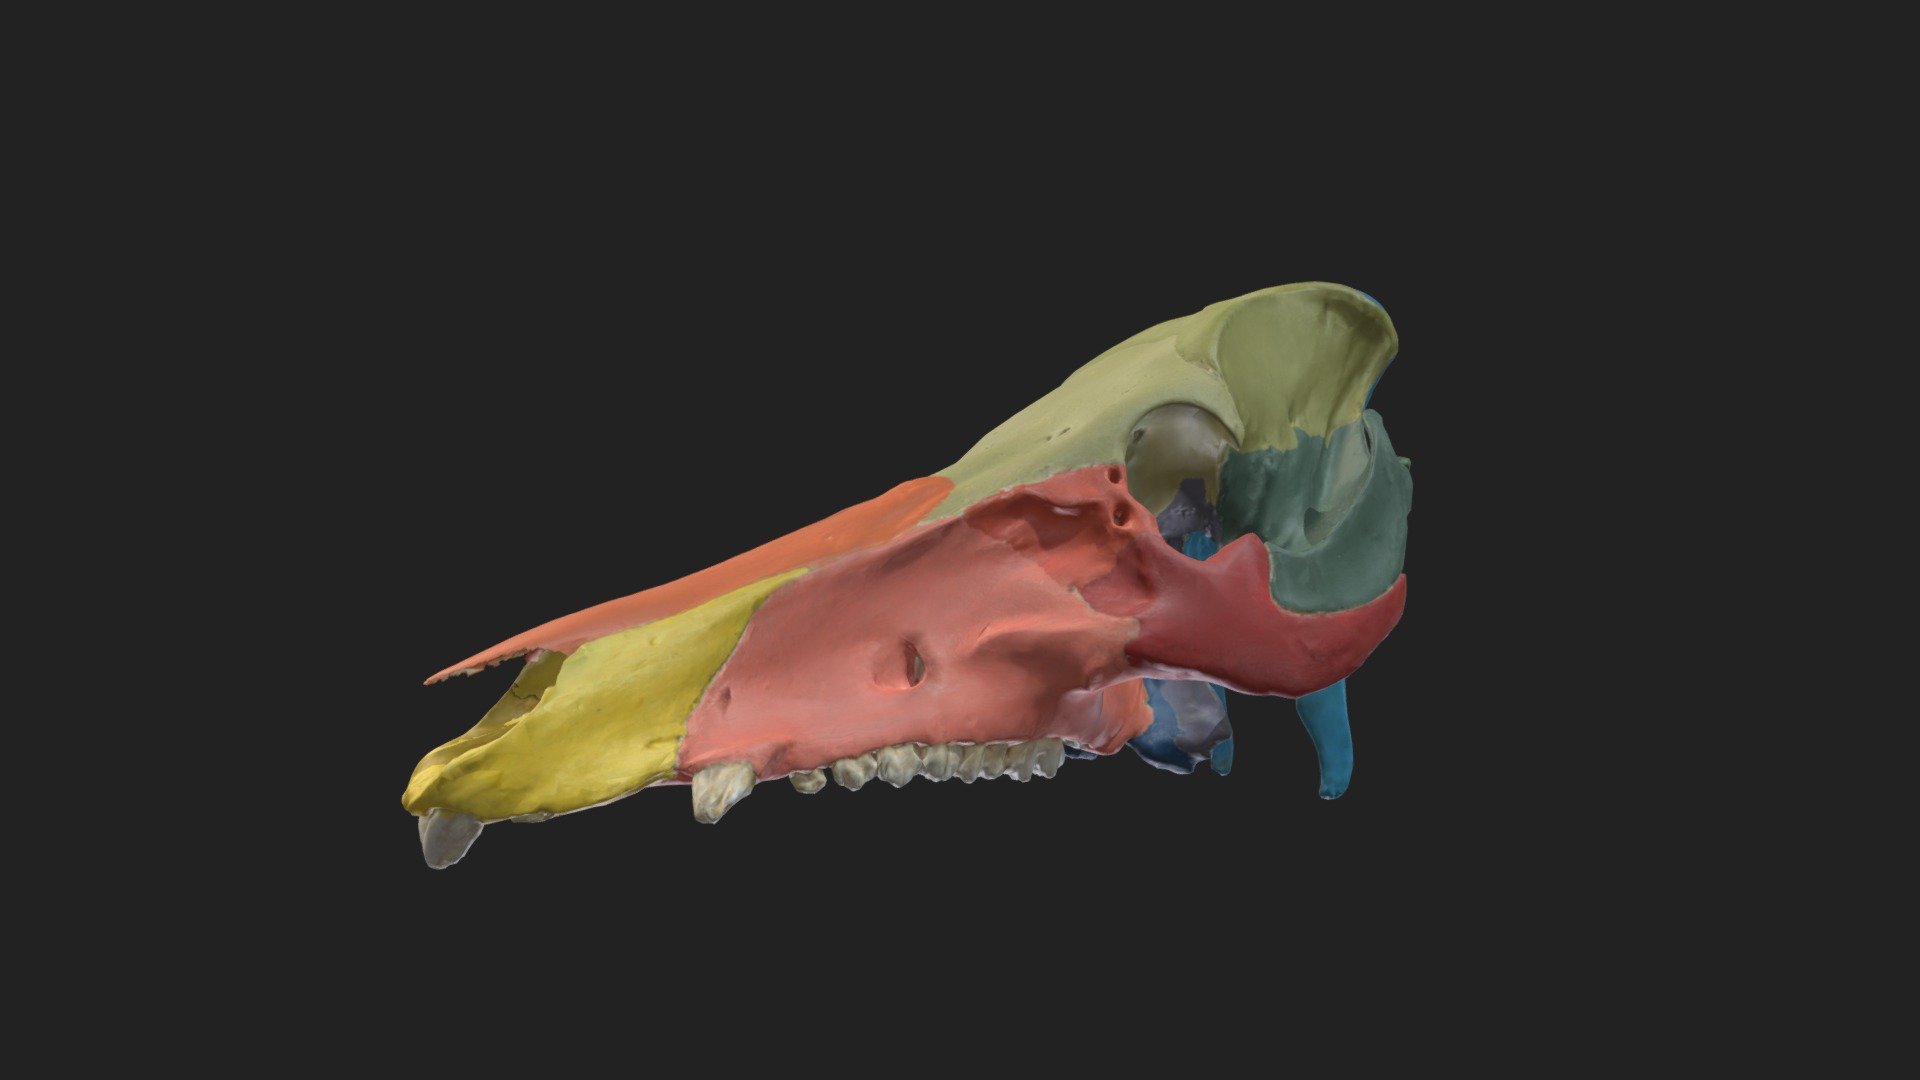 painted upper skull of a pig

size of the specimen: 320.8 x 157.2 x 102.2 mm

3D scanning performed with the structured light scanner “Artec Spider”

caption:
yellow: incisive bone (Os incisivum) 
orange: nasale bone (Os nasale)
pink: maxilla (Maxilla) 
dark orange: lacrimal bone (Os lacrimale) 
red: zygomatic bone (Os zygomaticum) 
pale green: frontal bone (Os frontale) 
maygreen: parietal bone (Os parietale) 
olive green: interparietal bone (Os interparietale) 
dark green: temporal bone (Os temporale) 
dark blue: palatine bone (Os palatinum) 
black: pterygoid bone (Os pterygoideum)
white: vomer (Vomer)
purple: presphenoid (Os praesphenoidale)
dark purple: basisphenoid (Os basisphenoidale) 
pale blue: occipital bone (Os occipitale) 
royal blue: Squama occipitalis - painted upper skull of pig - 3D model by vetanatMunich 3d model